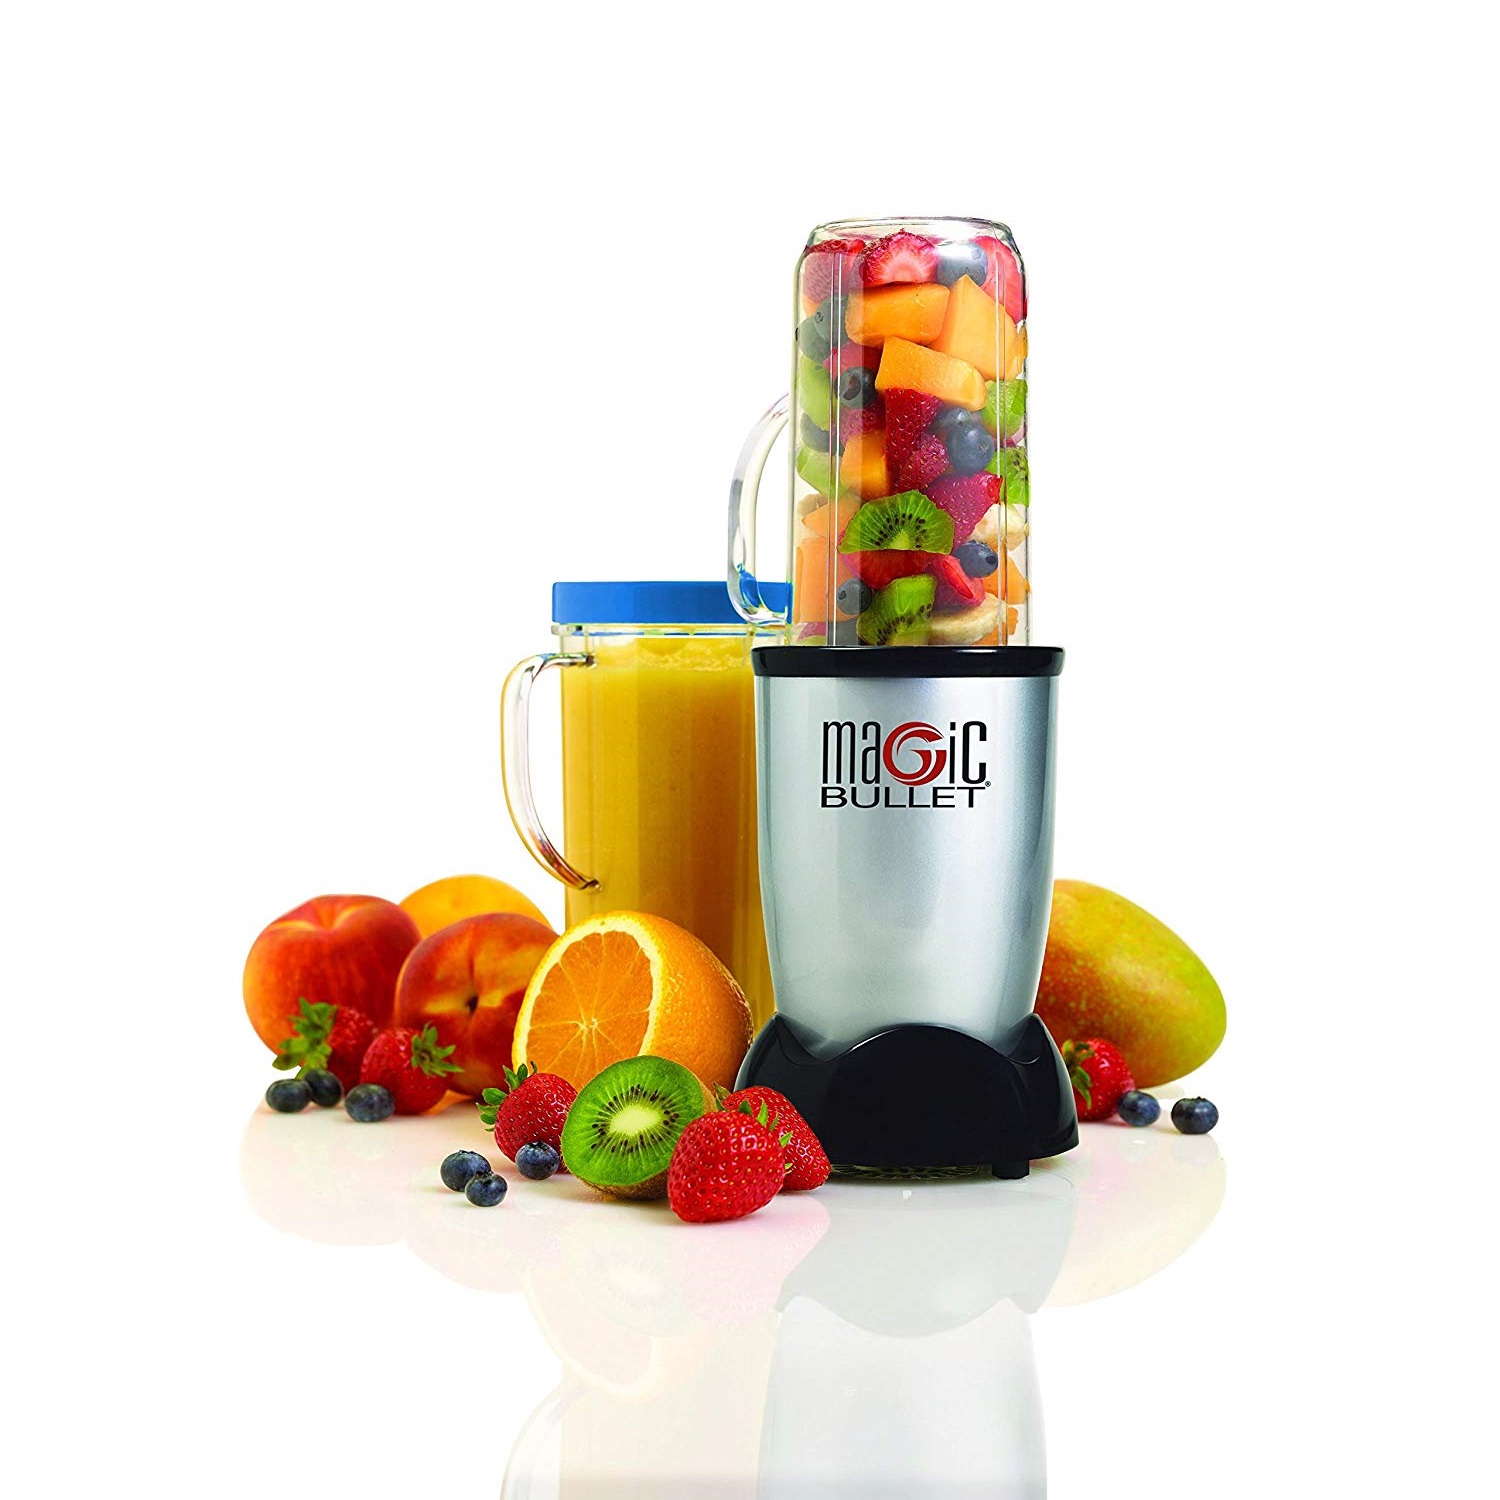 magic-bullet-anangmanang-lk-best-products-for-the-lowest-price